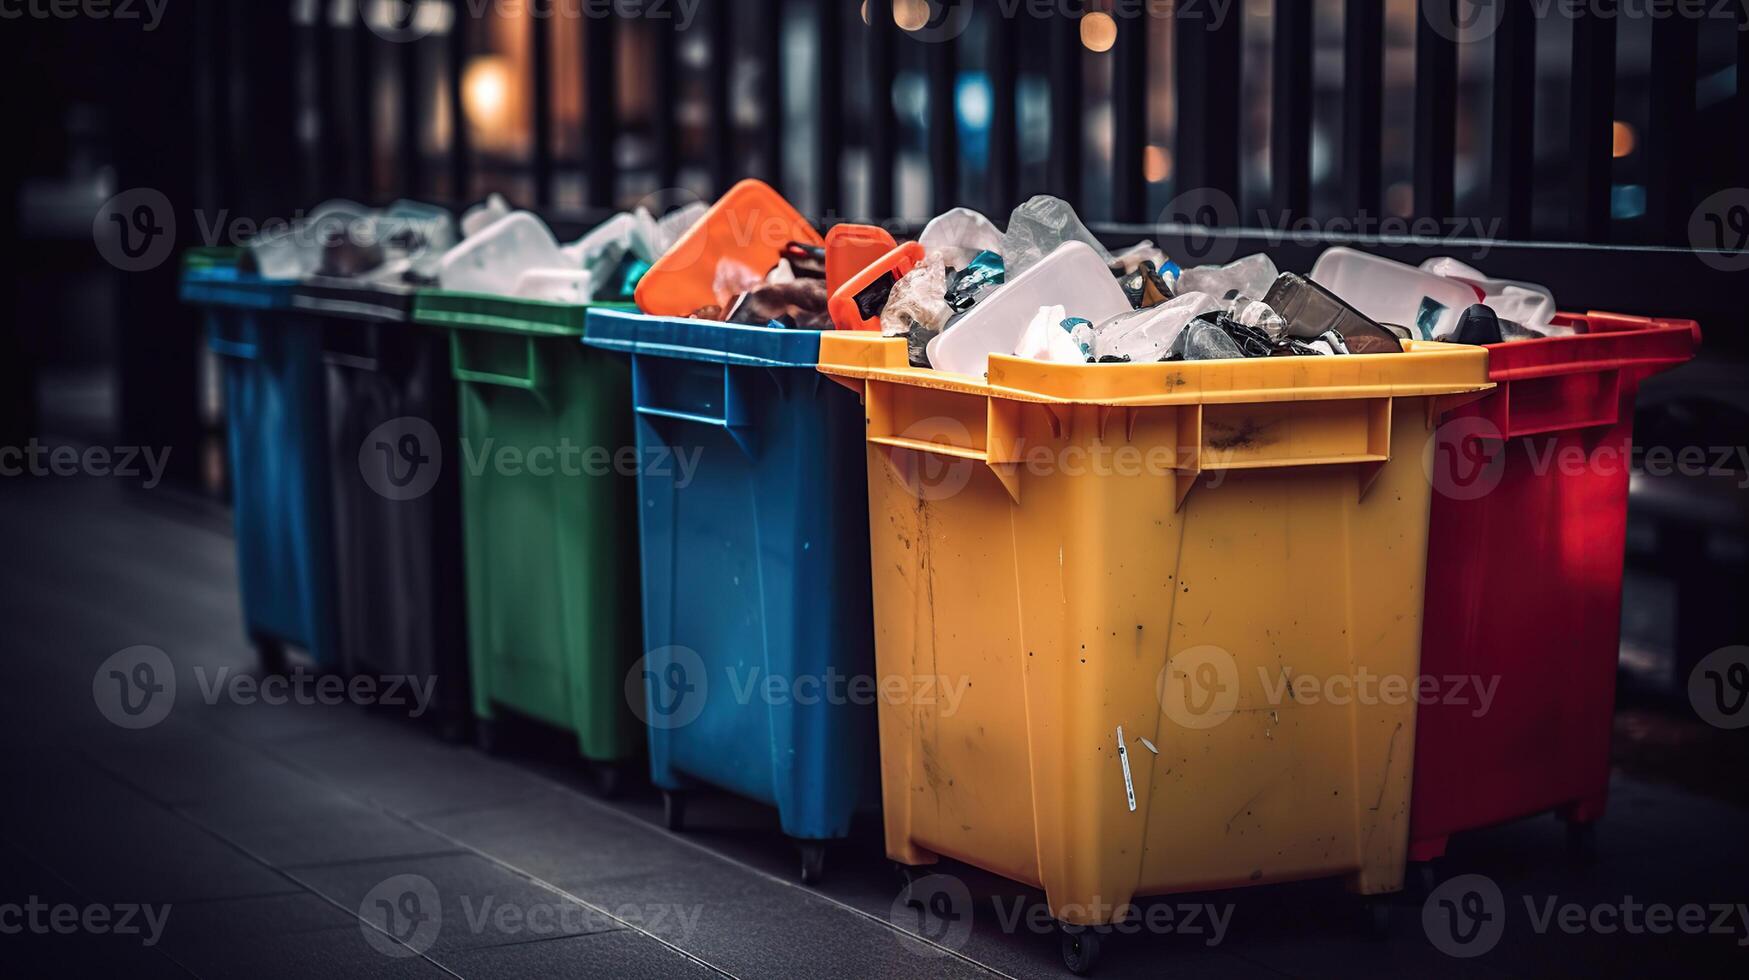 Recycling bin full of plastic waste, separate waste collection concept, photo